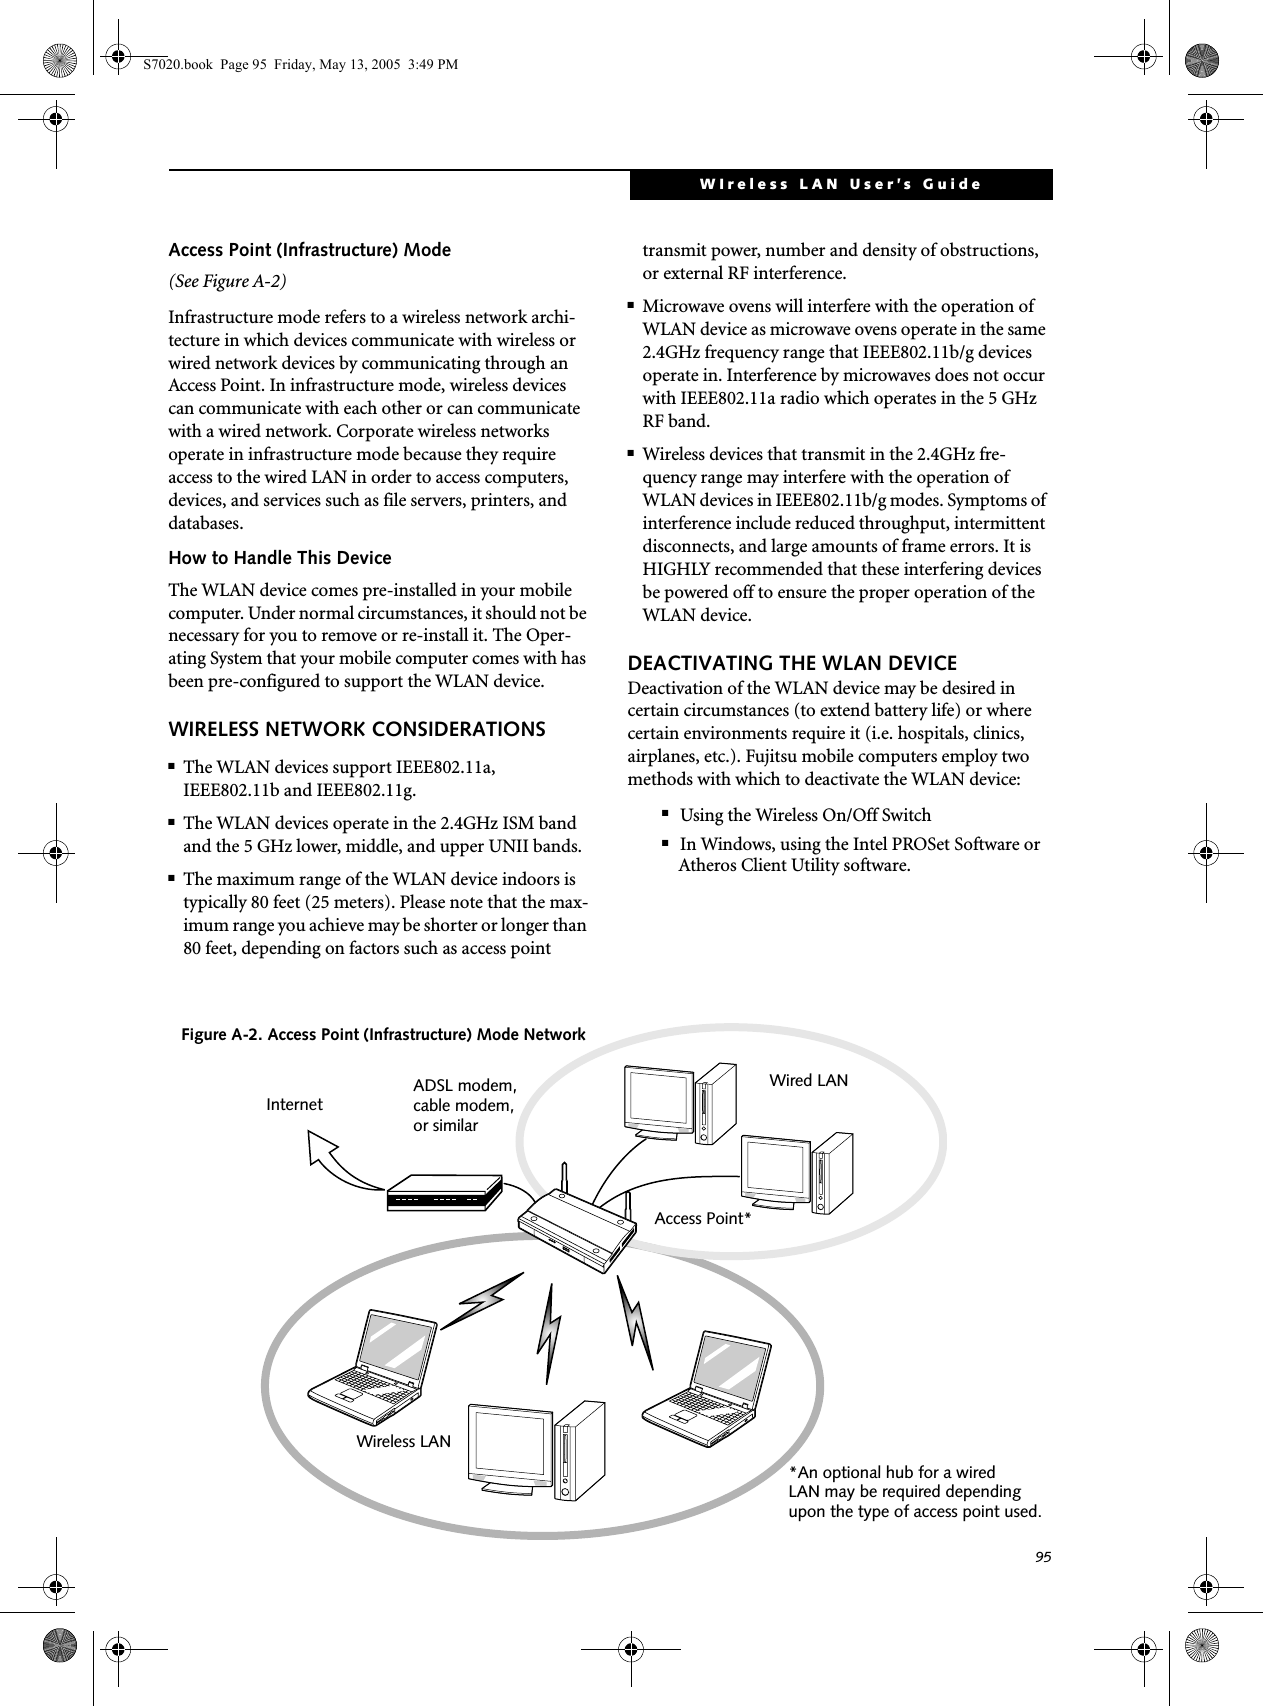 95WIreless LAN User’s Guide Access Point (Infrastructure) Mode (See Figure A-2)Infrastructure mode refers to a wireless network archi-tecture in which devices communicate with wireless or wired network devices by communicating through an Access Point. In infrastructure mode, wireless devices can communicate with each other or can communicate with a wired network. Corporate wireless networks operate in infrastructure mode because they require access to the wired LAN in order to access computers, devices, and services such as file servers, printers, and databases.How to Handle This DeviceThe WLAN device comes pre-installed in your mobile computer. Under normal circumstances, it should not be necessary for you to remove or re-install it. The Oper-ating System that your mobile computer comes with has been pre-configured to support the WLAN device. WIRELESS NETWORK CONSIDERATIONS■The WLAN devices support IEEE802.11a, IEEE802.11b and IEEE802.11g.■The WLAN devices operate in the 2.4GHz ISM band and the 5 GHz lower, middle, and upper UNII bands.■The maximum range of the WLAN device indoors is typically 80 feet (25 meters). Please note that the max-imum range you achieve may be shorter or longer than 80 feet, depending on factors such as access point transmit power, number and density of obstructions, or external RF interference.■Microwave ovens will interfere with the operation of WLAN device as microwave ovens operate in the same 2.4GHz frequency range that IEEE802.11b/g devices operate in. Interference by microwaves does not occur with IEEE802.11a radio which operates in the 5 GHz RF band.■Wireless devices that transmit in the 2.4GHz fre-quency range may interfere with the operation of WLAN devices in IEEE802.11b/g modes. Symptoms of interference include reduced throughput, intermittent disconnects, and large amounts of frame errors. It is HIGHLY recommended that these interfering devices be powered off to ensure the proper operation of the WLAN device.DEACTIVATING THE WLAN DEVICEDeactivation of the WLAN device may be desired in certain circumstances (to extend battery life) or where certain environments require it (i.e. hospitals, clinics, airplanes, etc.). Fujitsu mobile computers employ two methods with which to deactivate the WLAN device:■Using the Wireless On/Off Switch■In Windows, using the Intel PROSet Software or Atheros Client Utility software.Figure A-2. Access Point (Infrastructure) Mode NetworkADSL modem,cable modem,or similarInternetWired LANAccess Point*Wireless LAN*An optional hub for a wiredLAN may be required dependingupon the type of access point used.S7020.book  Page 95  Friday, May 13, 2005  3:49 PM